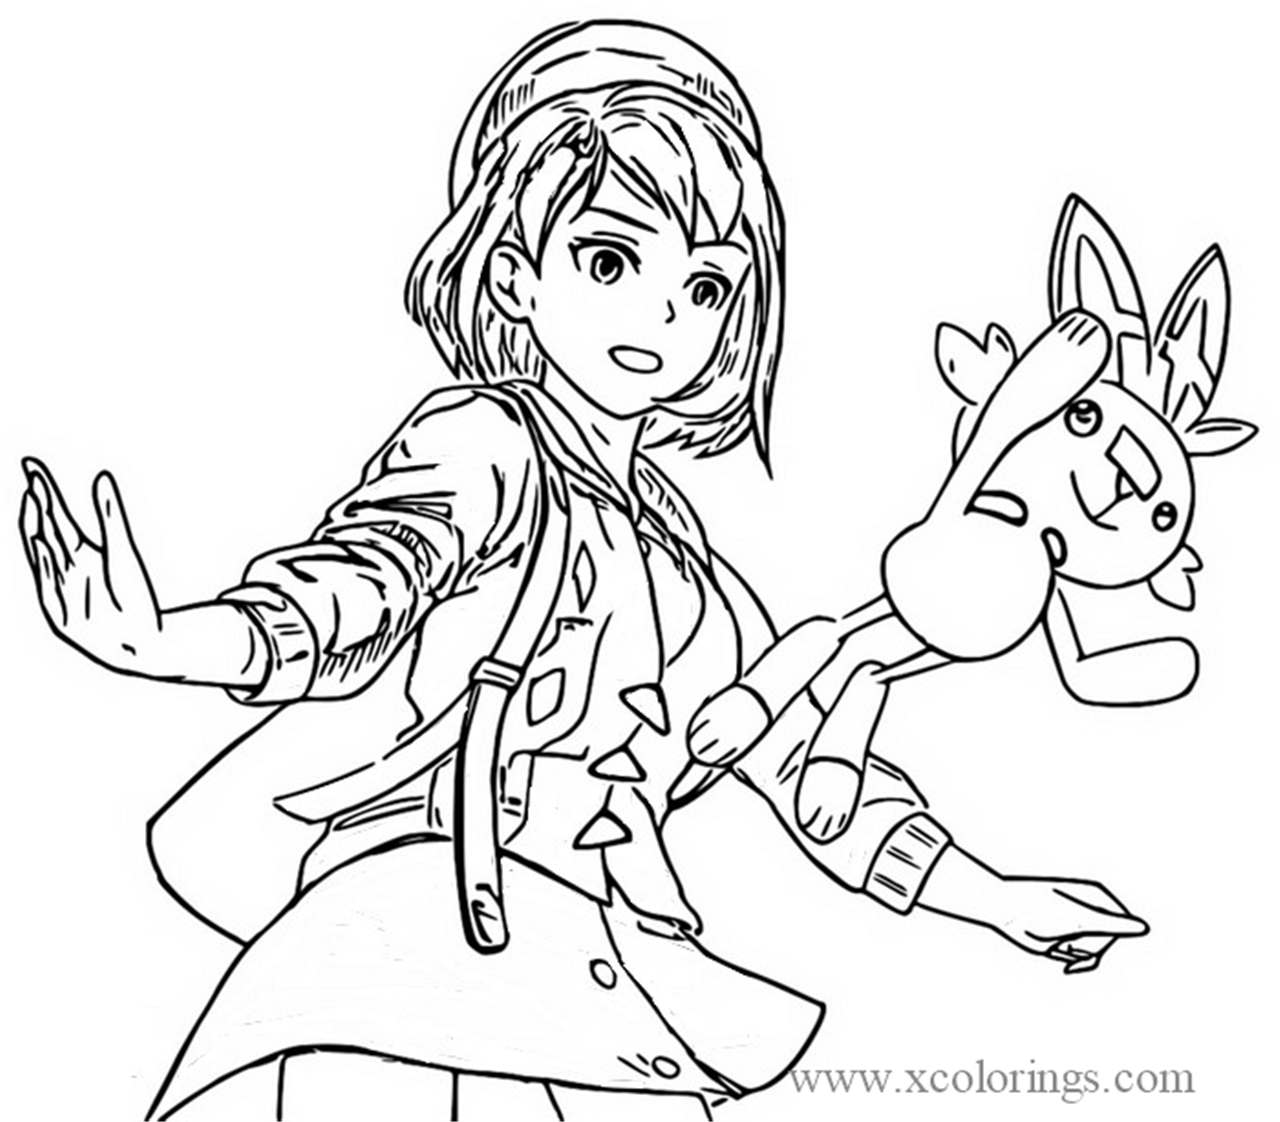 Free Scorbunny and Trainer from Pokemon Sword and Shield Coloring Pages printable